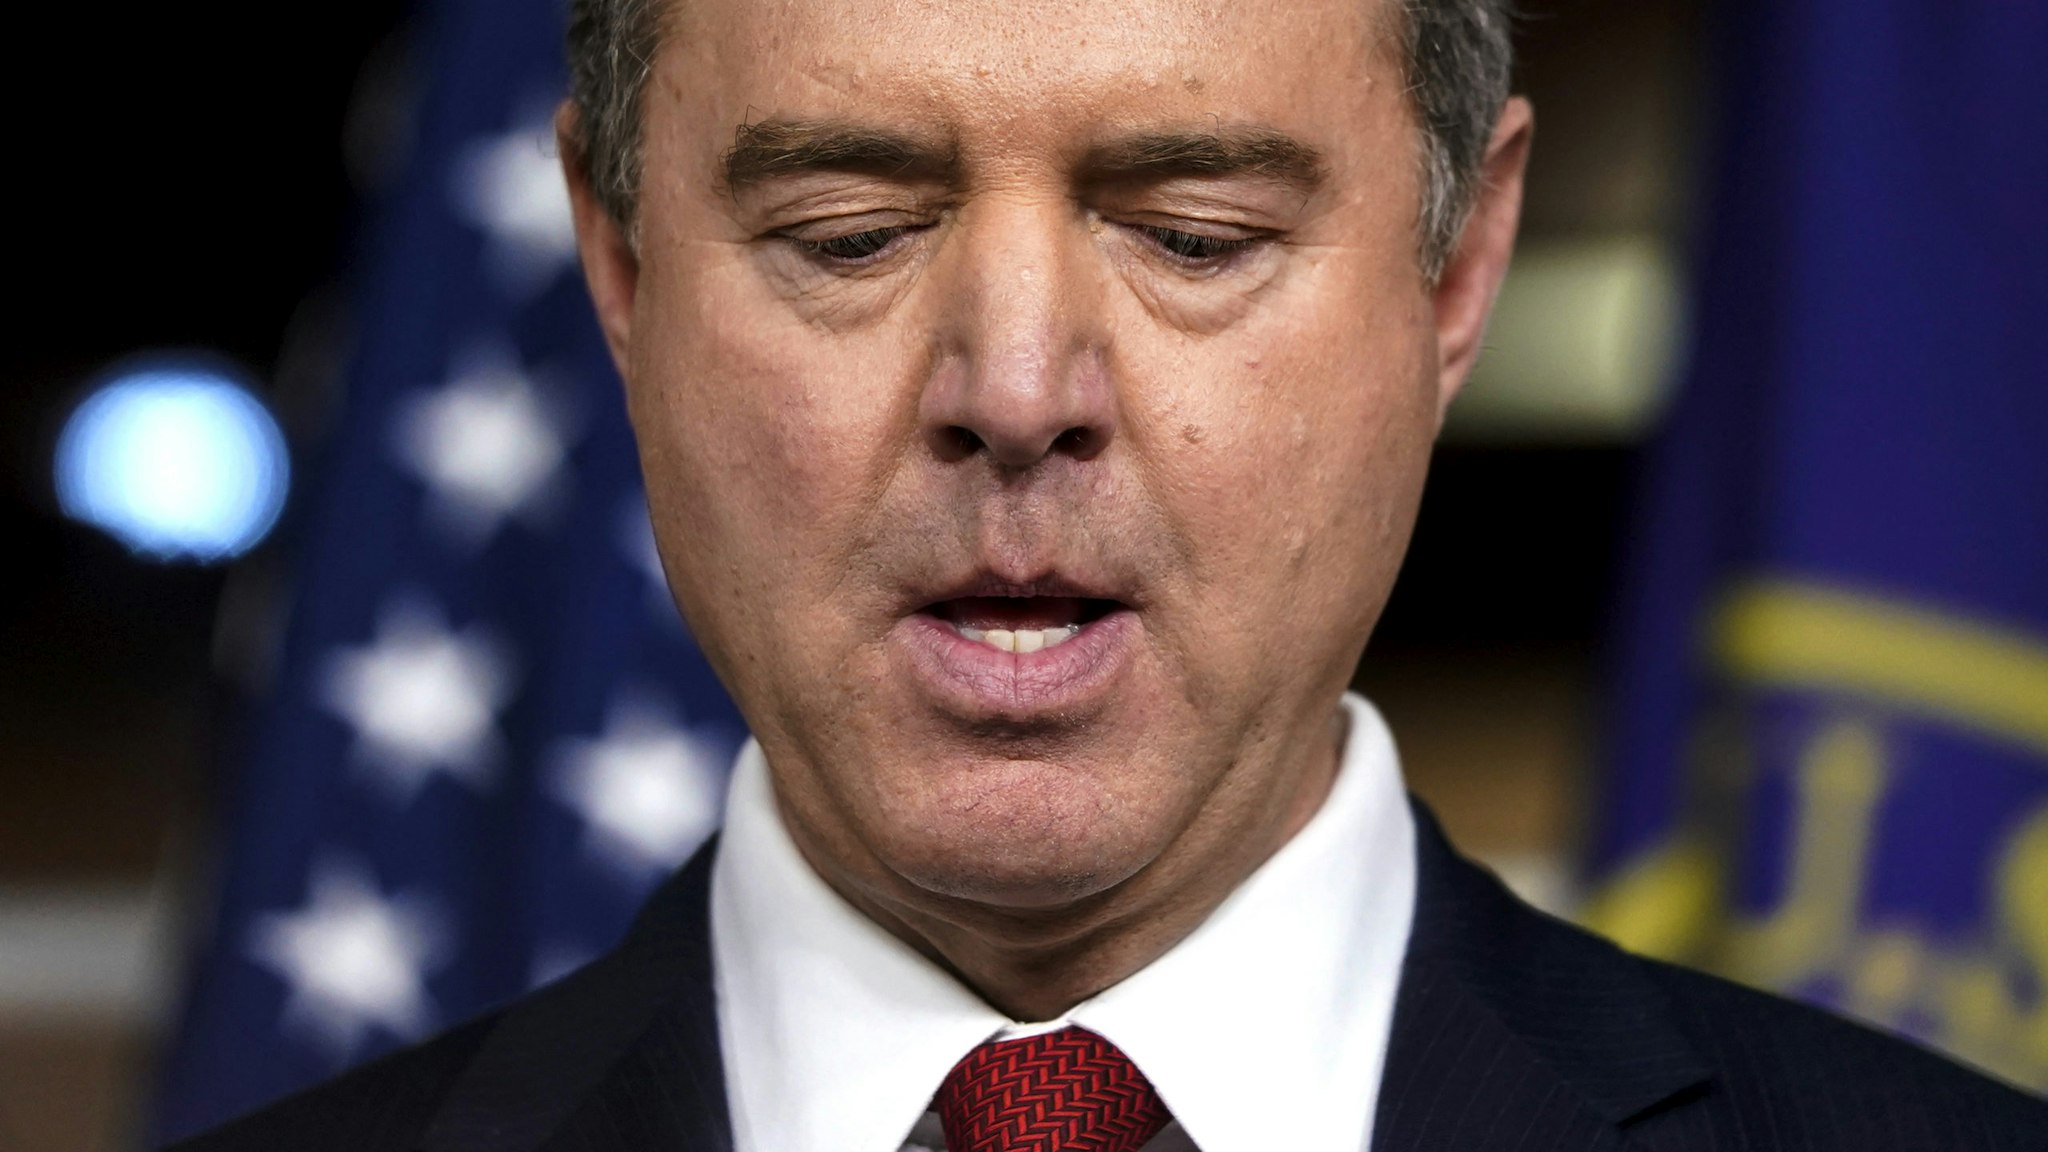 WASHINGTON, DC - JANUARY 28: House impeachment manager Rep. Adam Schiff (D-CA) pauses during press conference after the Senate adjourned for the day during the Senate impeachment trial at the U.S. Capitol on January 28, 2020 in Washington, DC. President Donald Trump's legal defense team concluded their arguments today and will begin answering written questions from Senators on Wednesday.